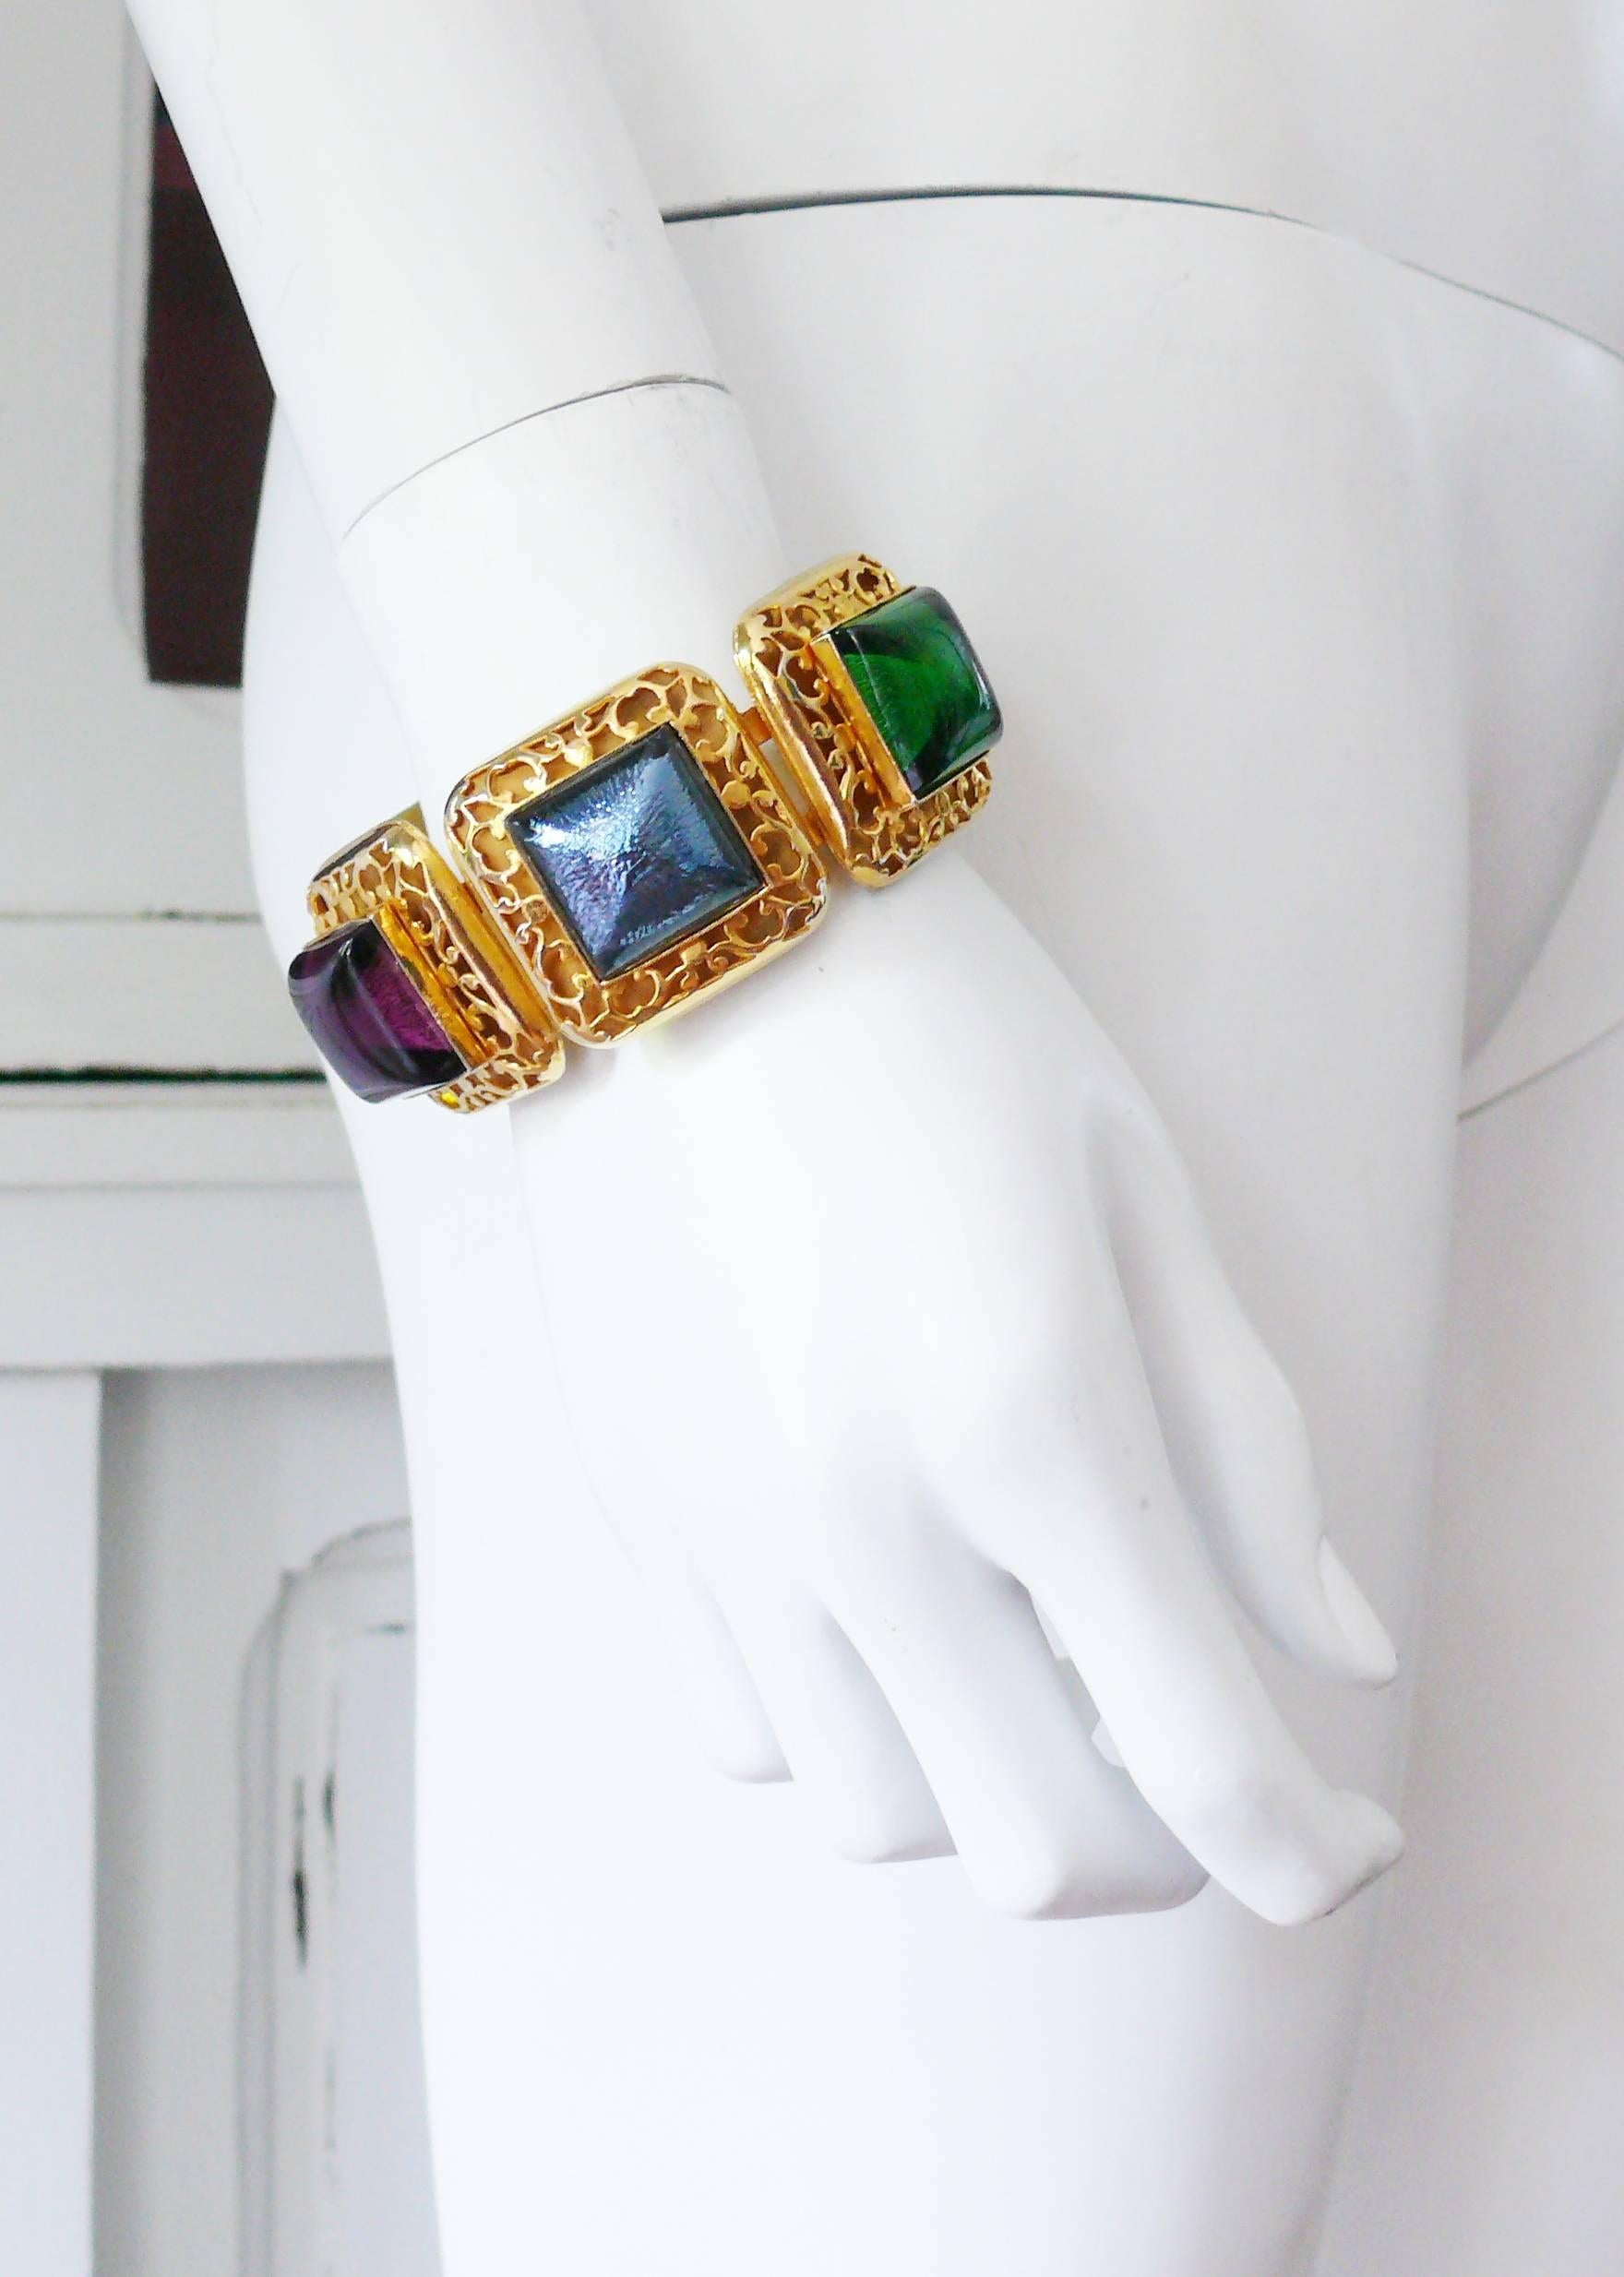 PHILLIPE FERRANDIS Paris vintage gold toned cuff bracelet featuring an openwork design embellished with multicolored glass cabochons.

Signed PHILIPPE FERRANDIS Paris.

Indicative measurements : inner measurements approx. 6.4 cm (2.52 inches) x 5.7